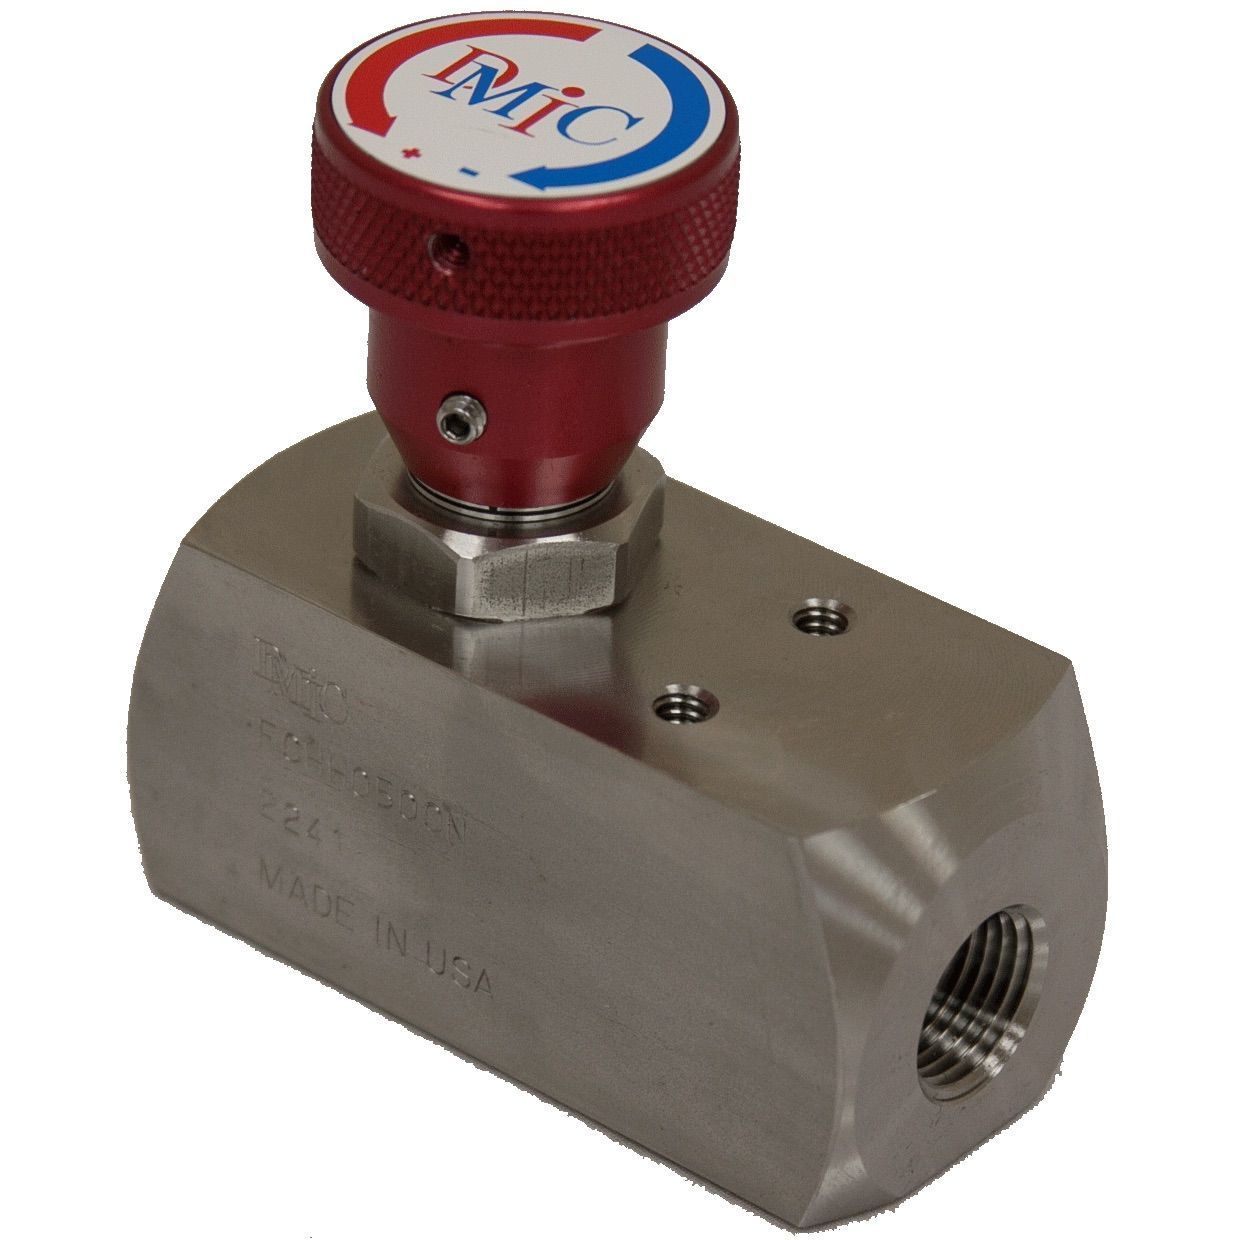 FCHH-2000S-1141 : DMIC Flow Control, Unidirectional, with Integrated Check, #32 SAE (2"), Carbon Steel, 10000psi